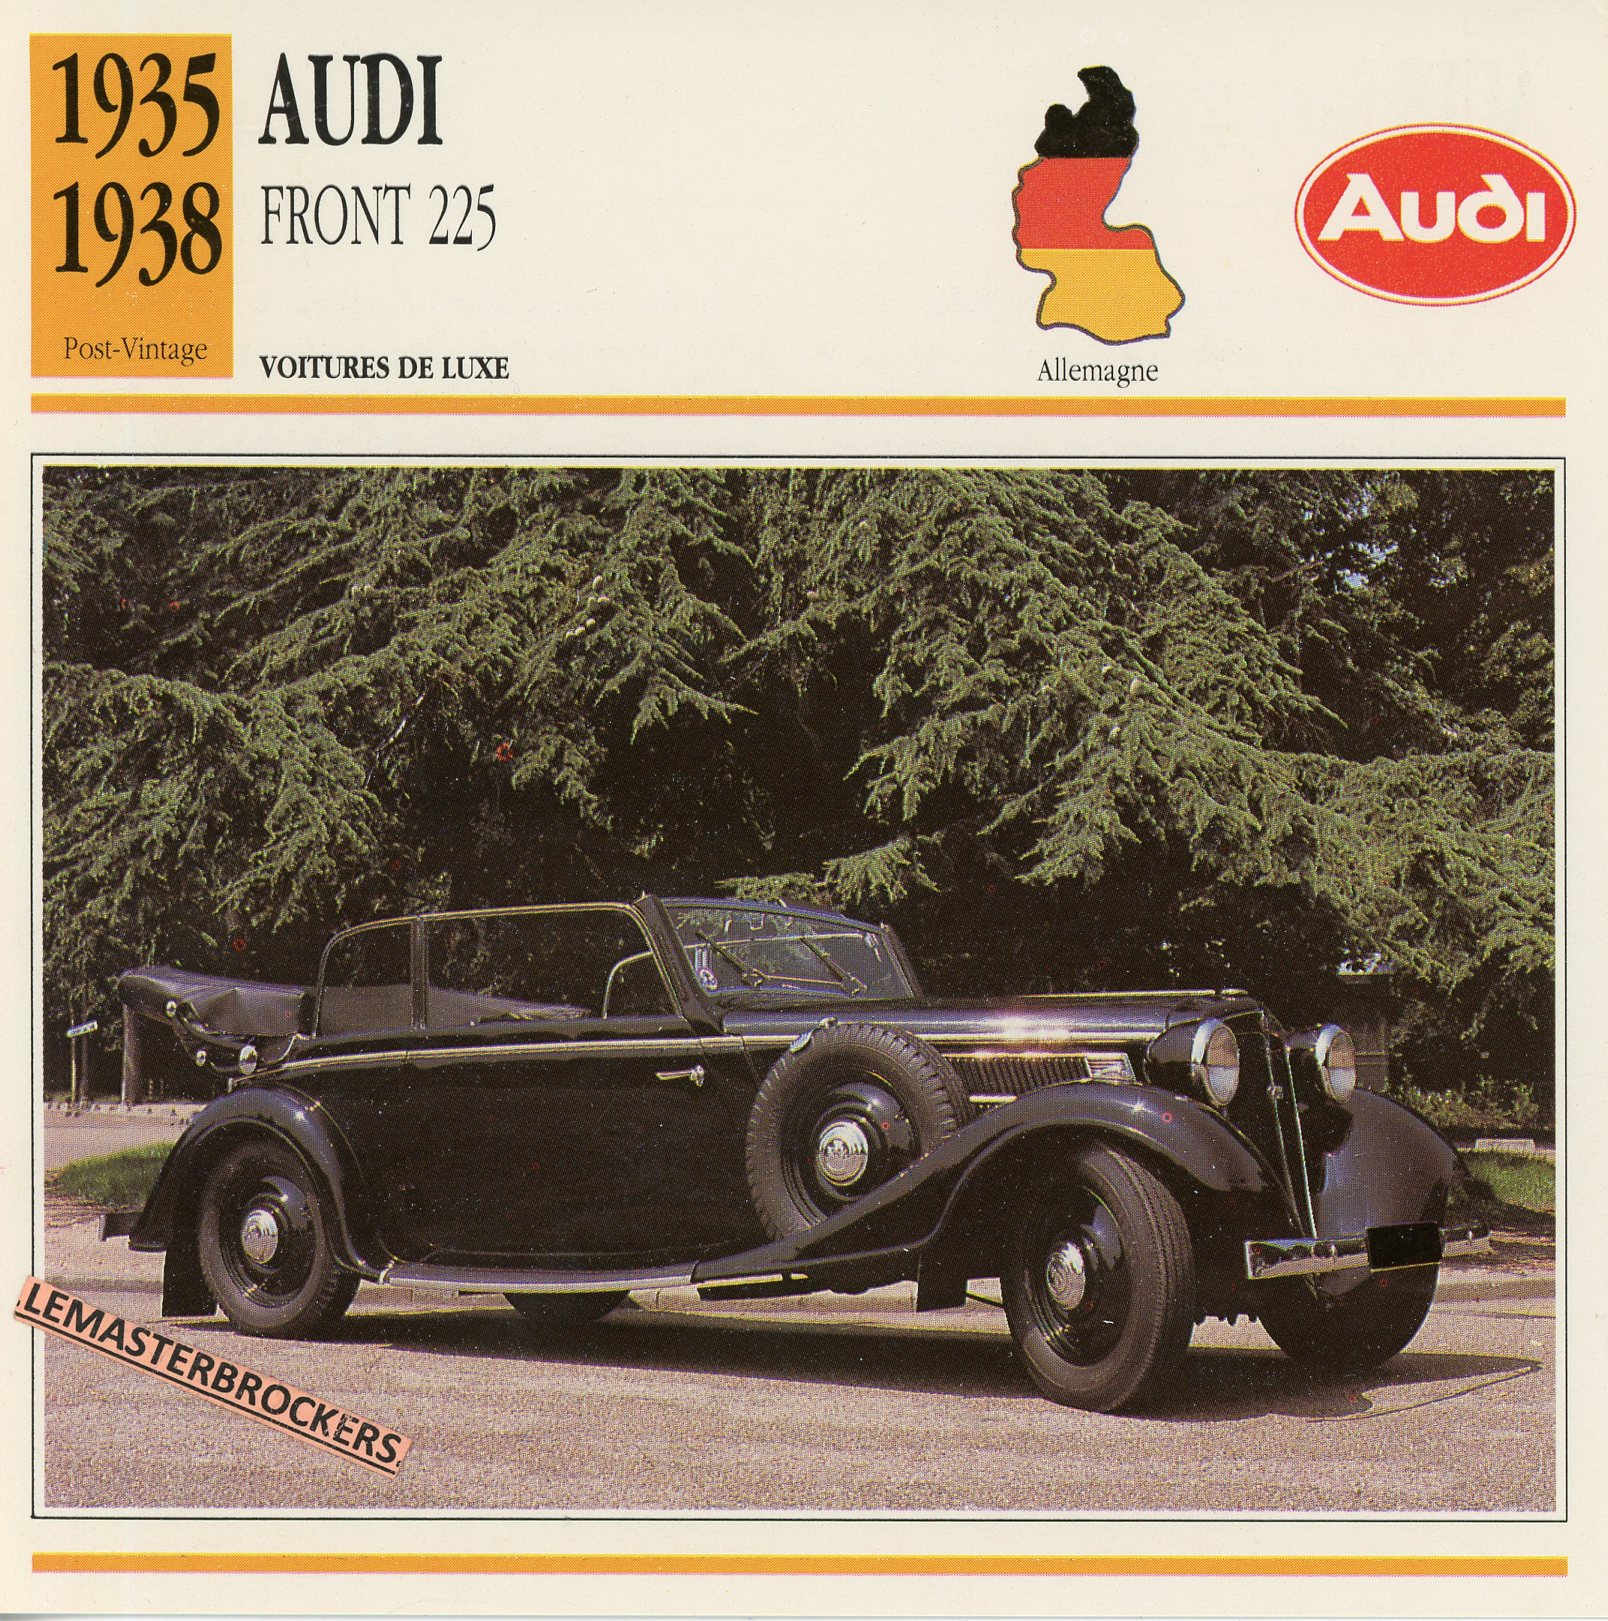 FICHE-AUDI-FRONT-225-LEMASTERBROCKERS-FICHE-AUTO-CARS-CARD-ATLAS-FRENCH